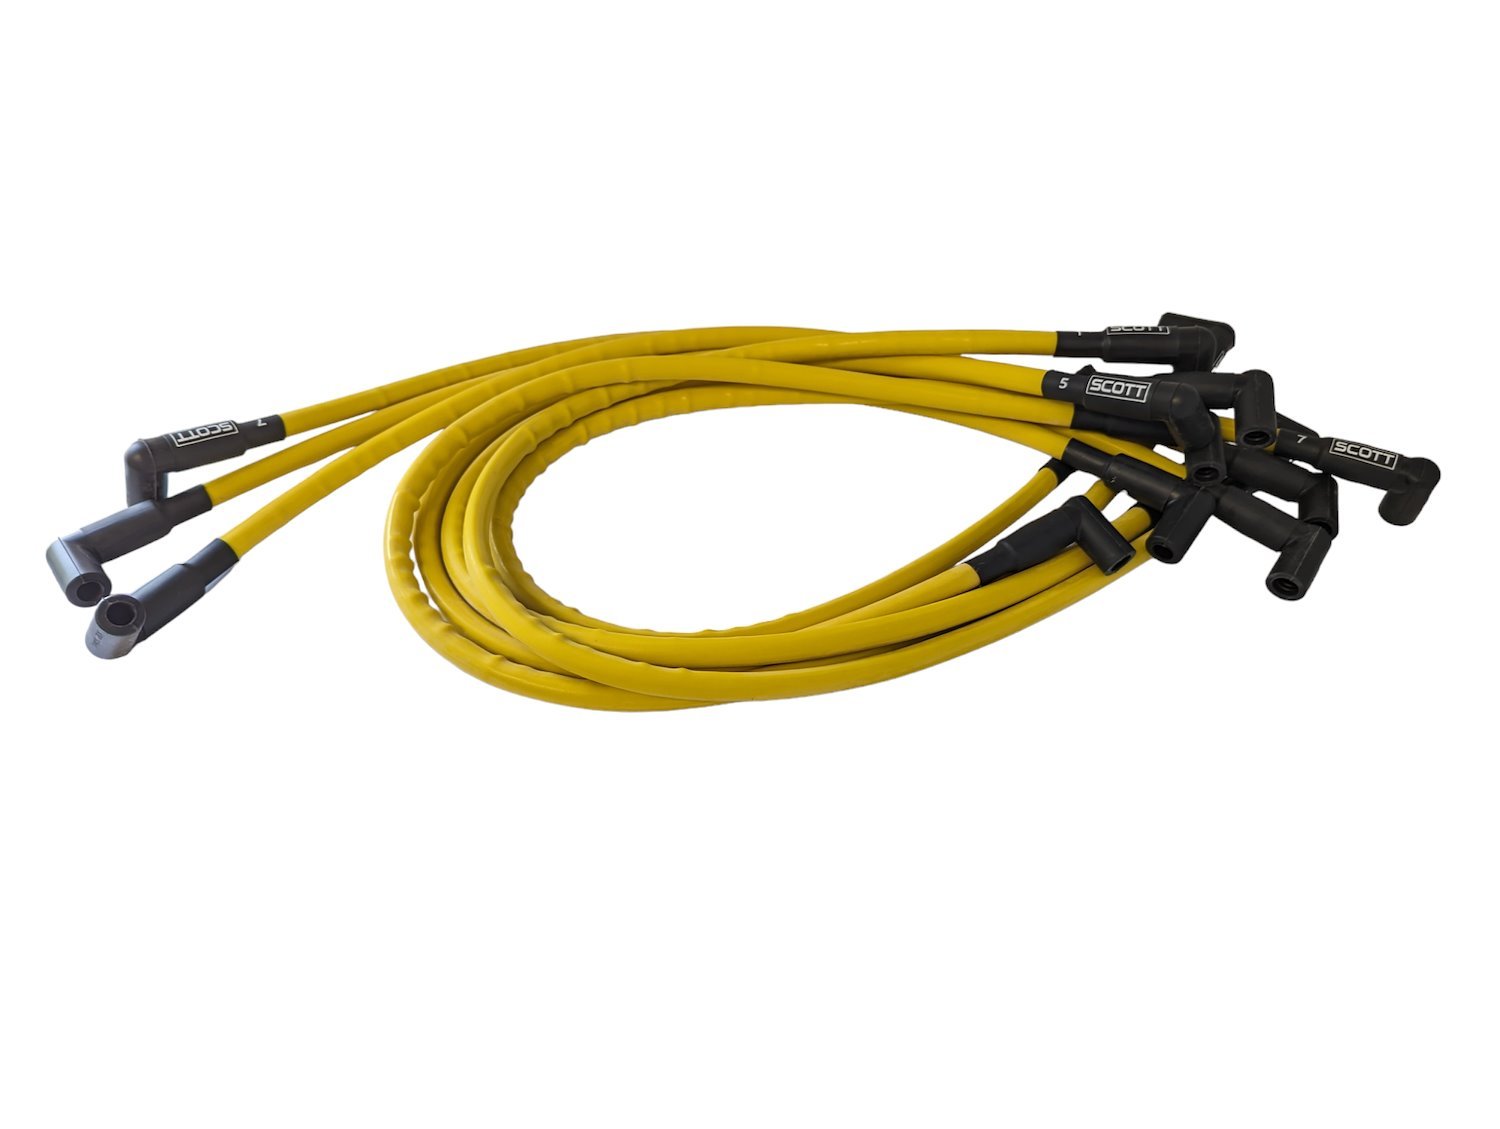 SPW-CH-516-7 High-Performance Silicone-Sleeved Spark Plug Wire Set for Big Block Chevy Dragster, Under Header [Yellow]